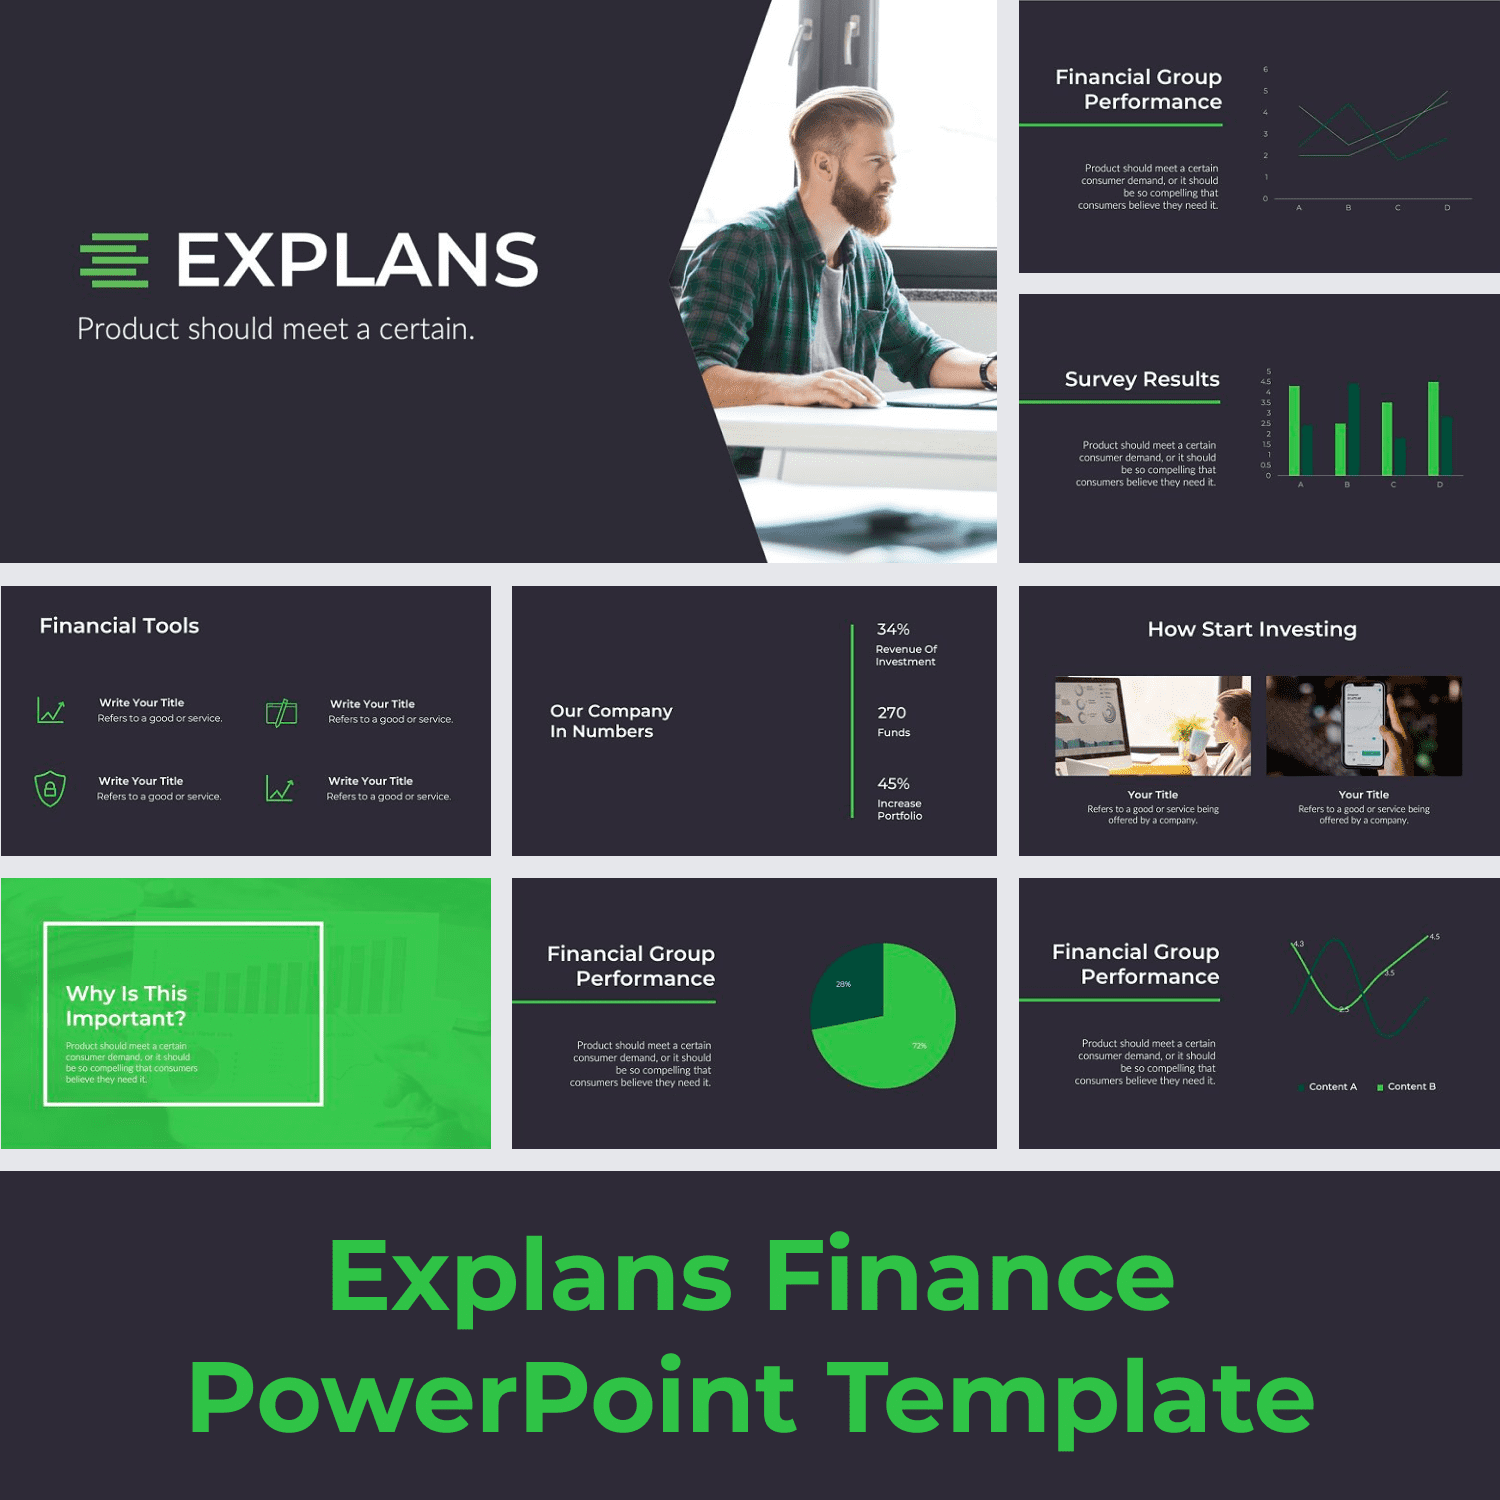 Explans Finance PowerPoint Template main cover.